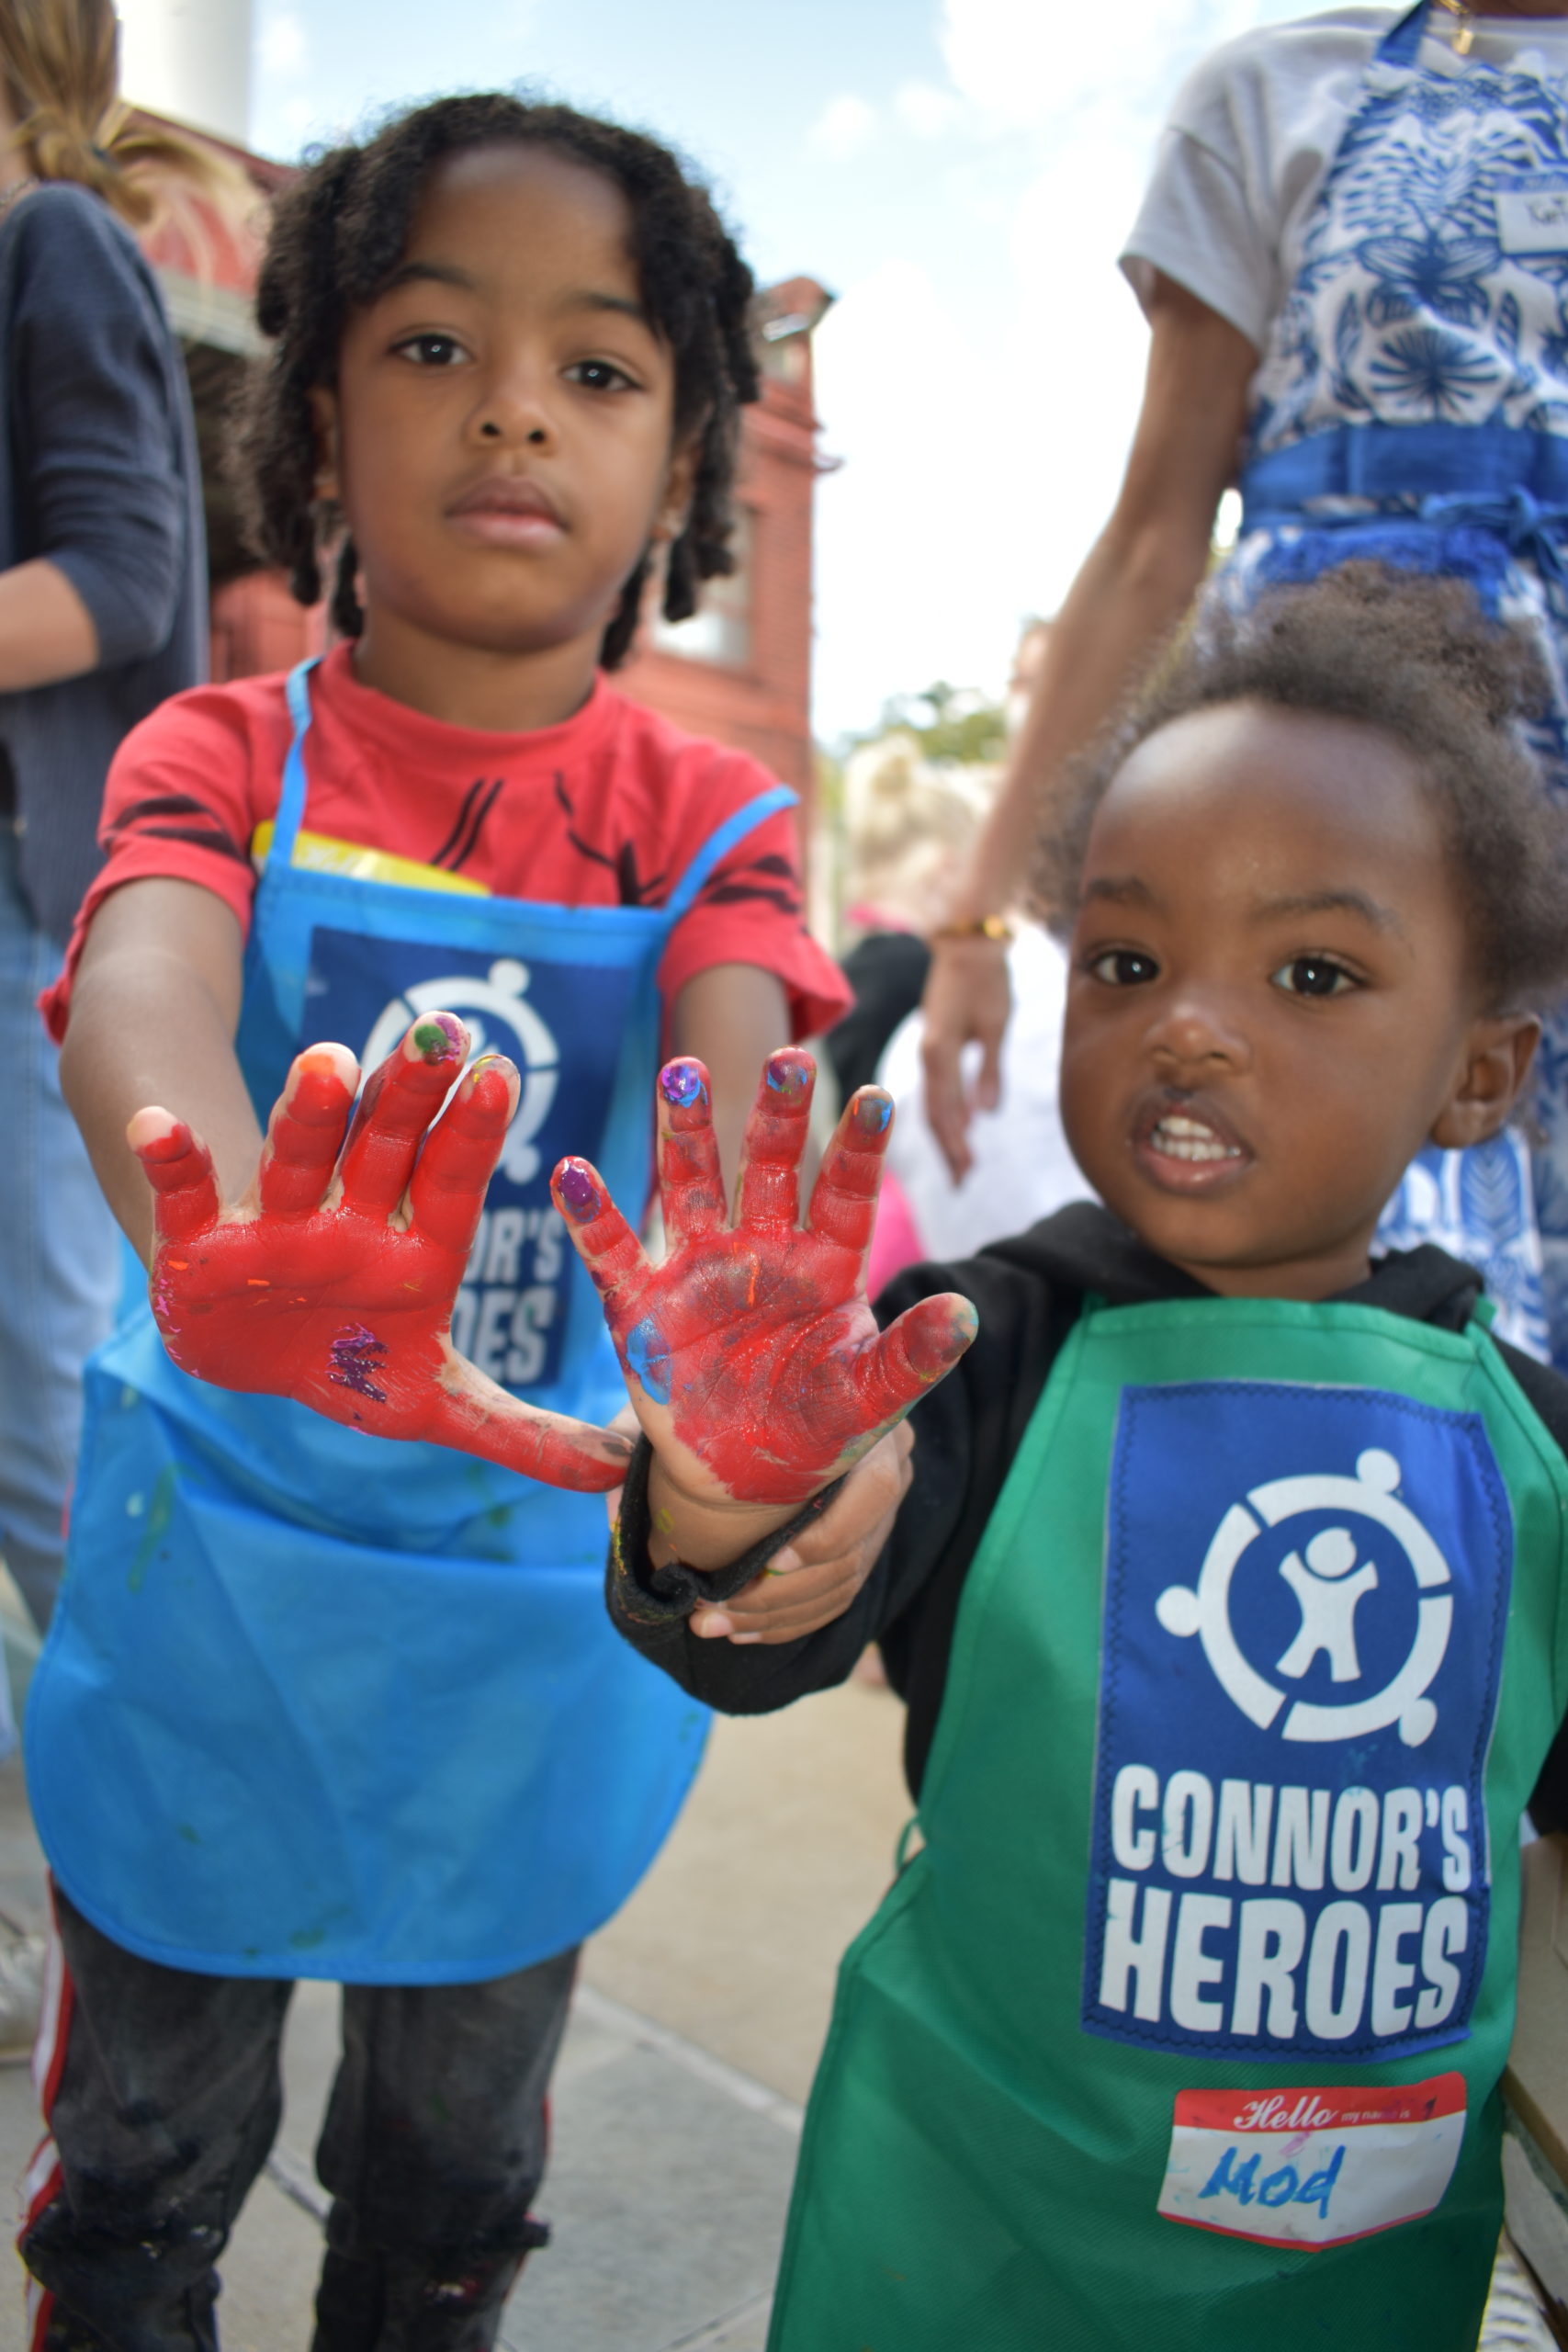 Two children holding up their hands that are covered with painted